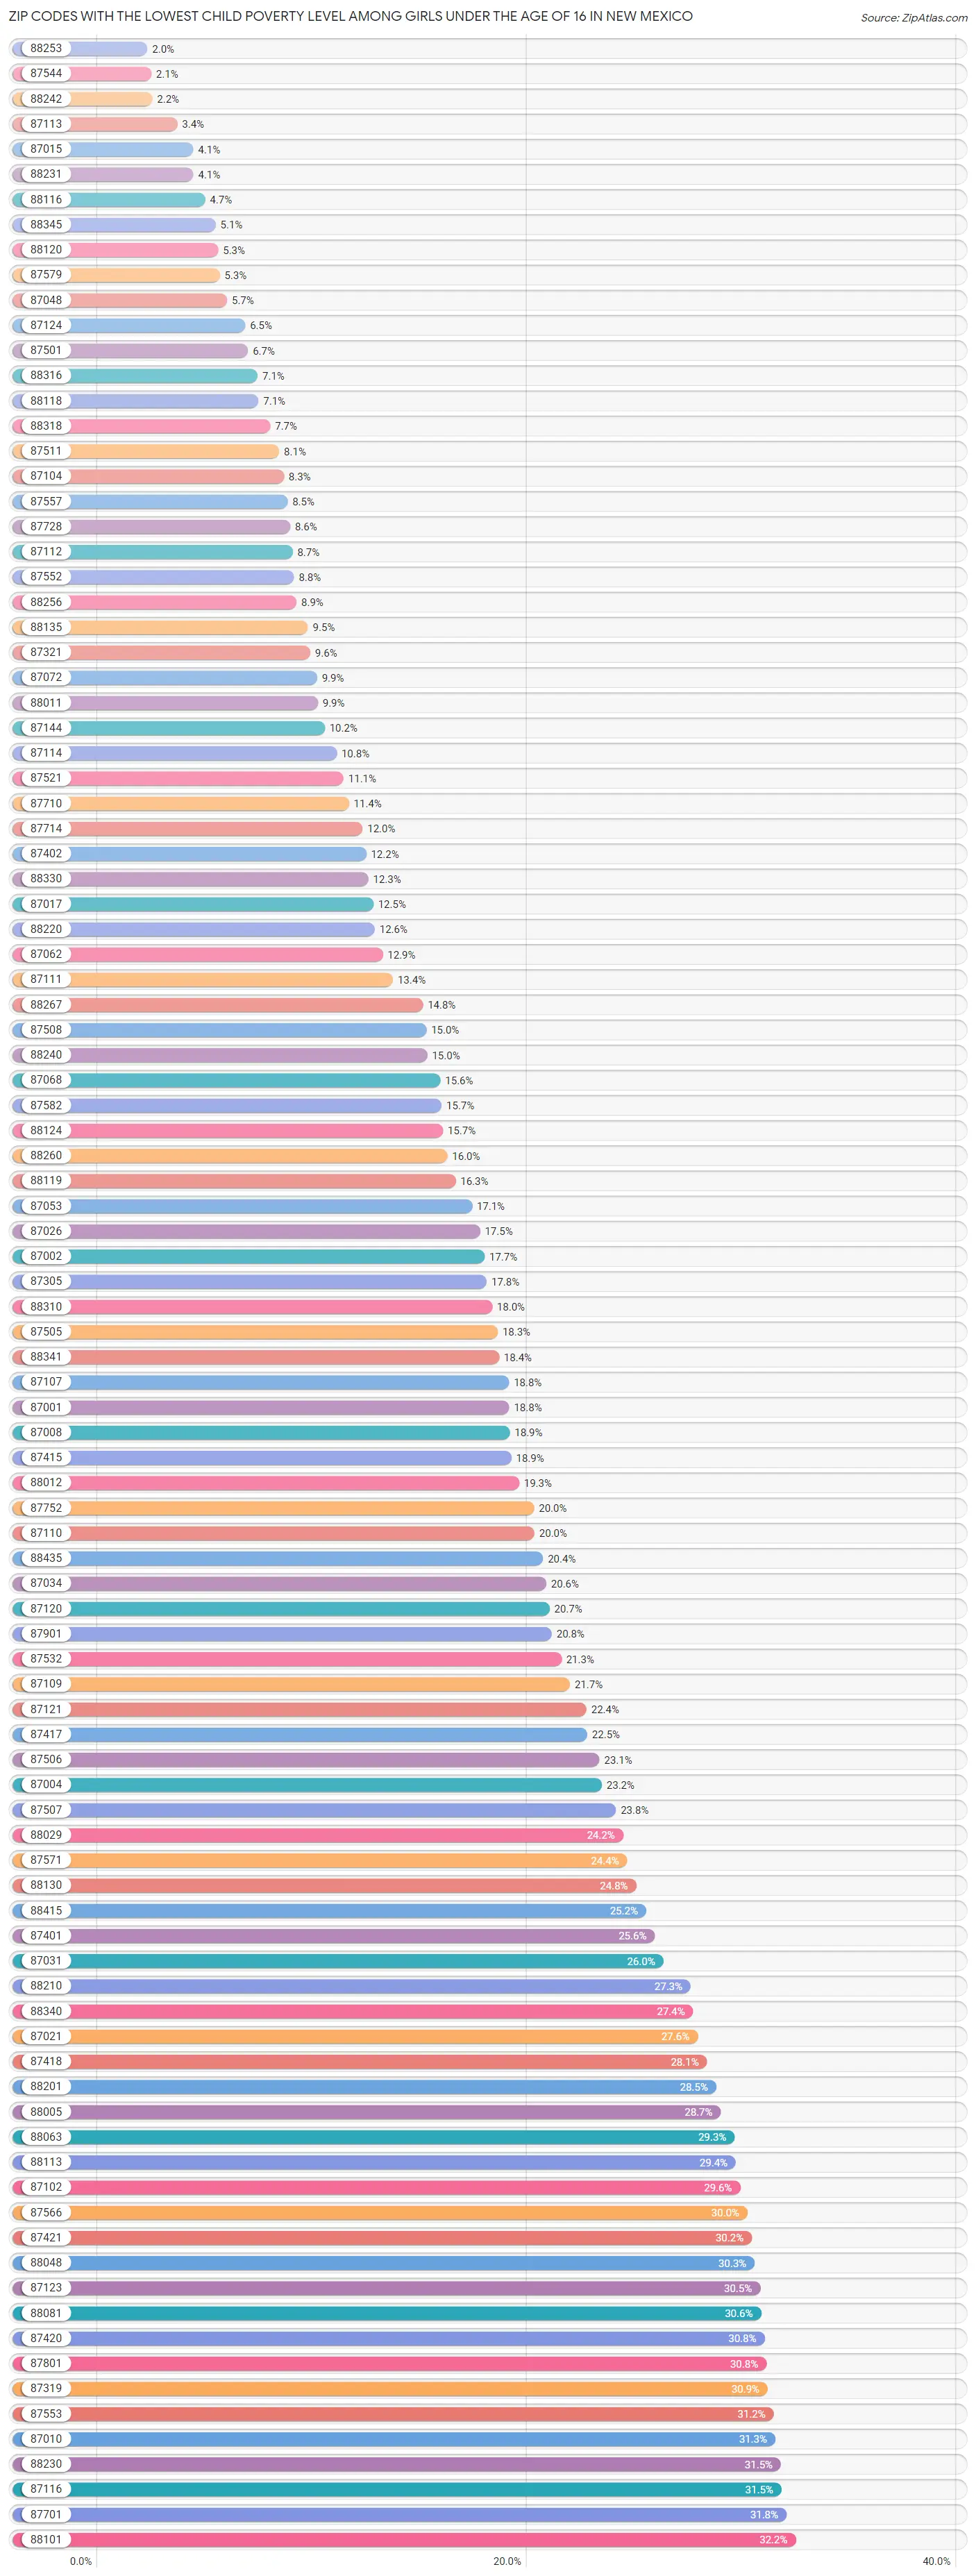 Zip Codes with the Lowest Child Poverty Level Among Girls Under the Age of 16 in New Mexico Chart